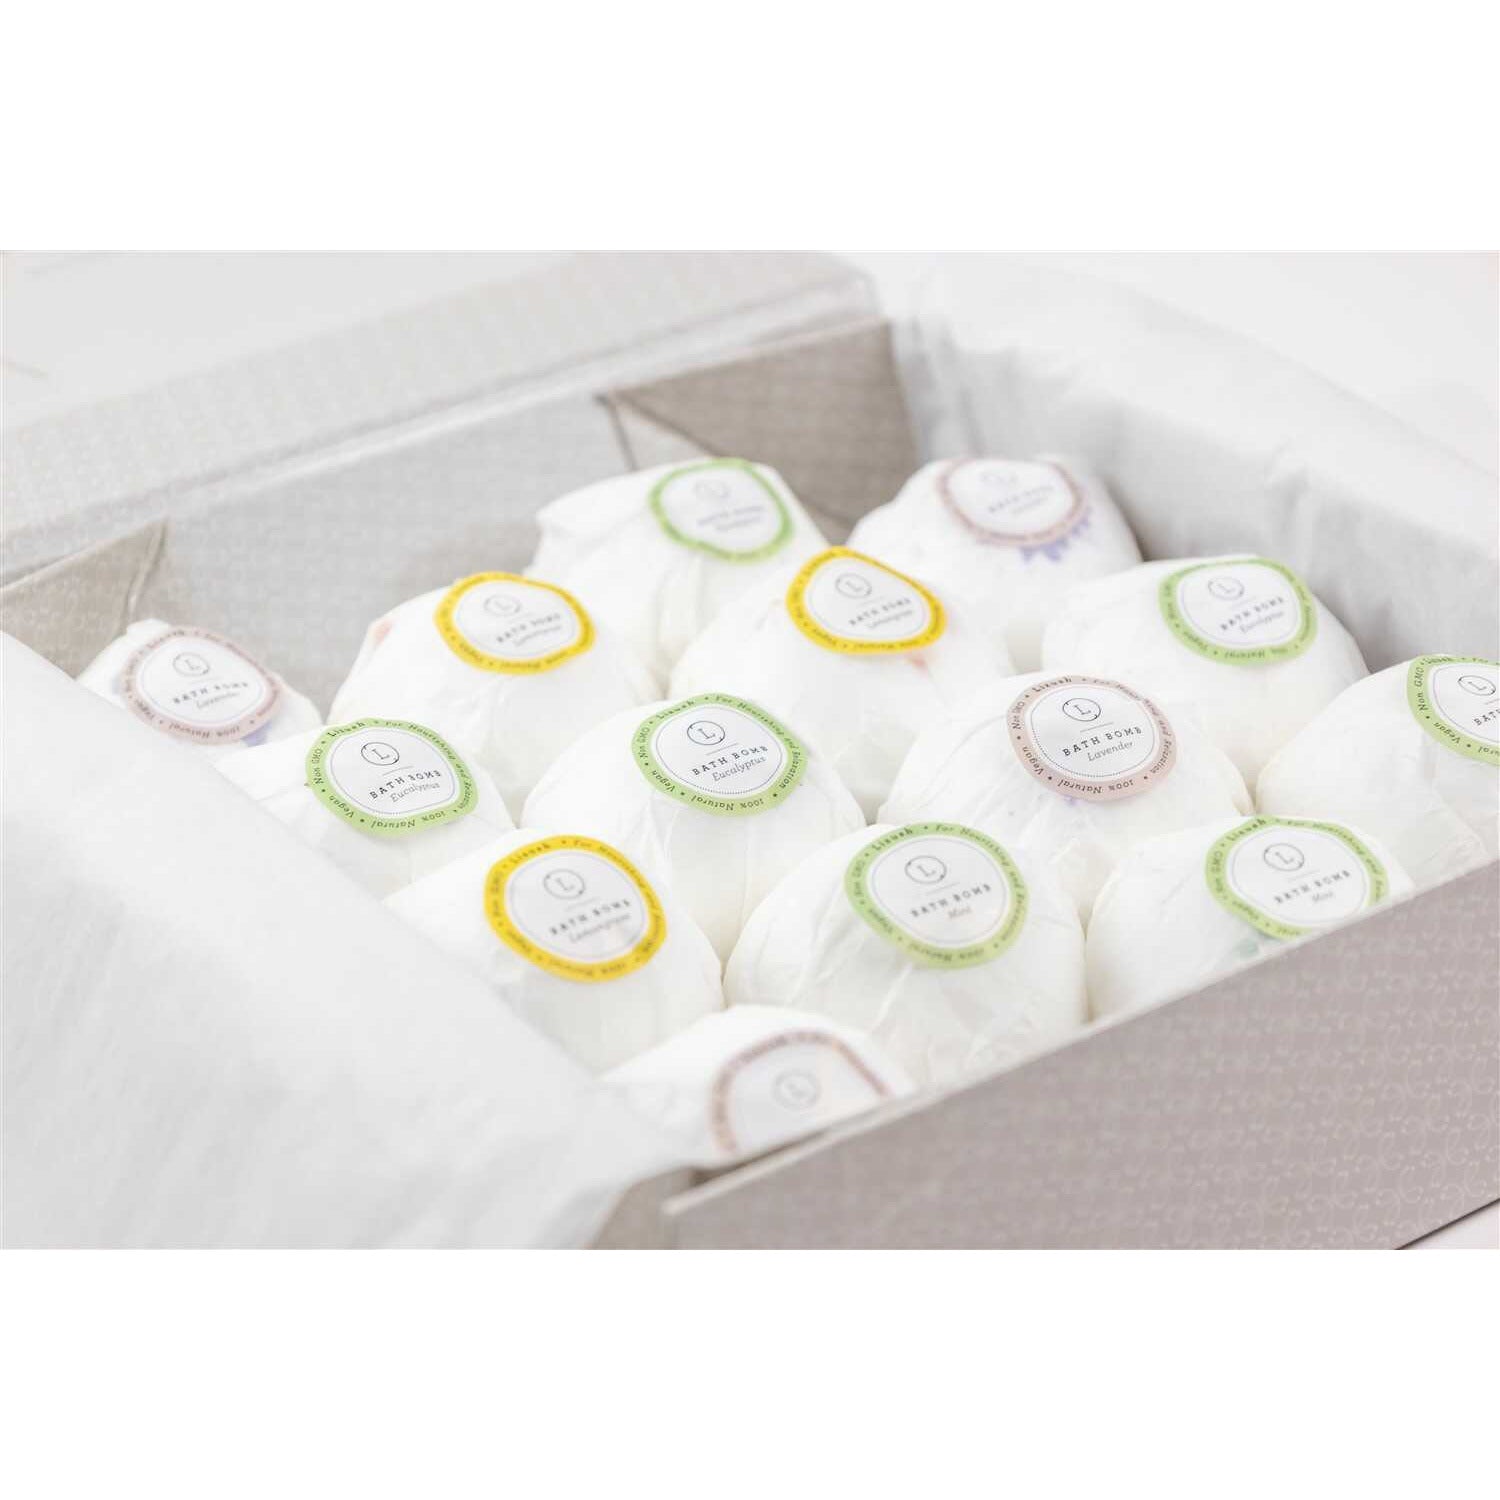 Bath Bombs Gift Box, Set of 14 Big 100% Natural Relaxing Bath Bombs - KME means the very best